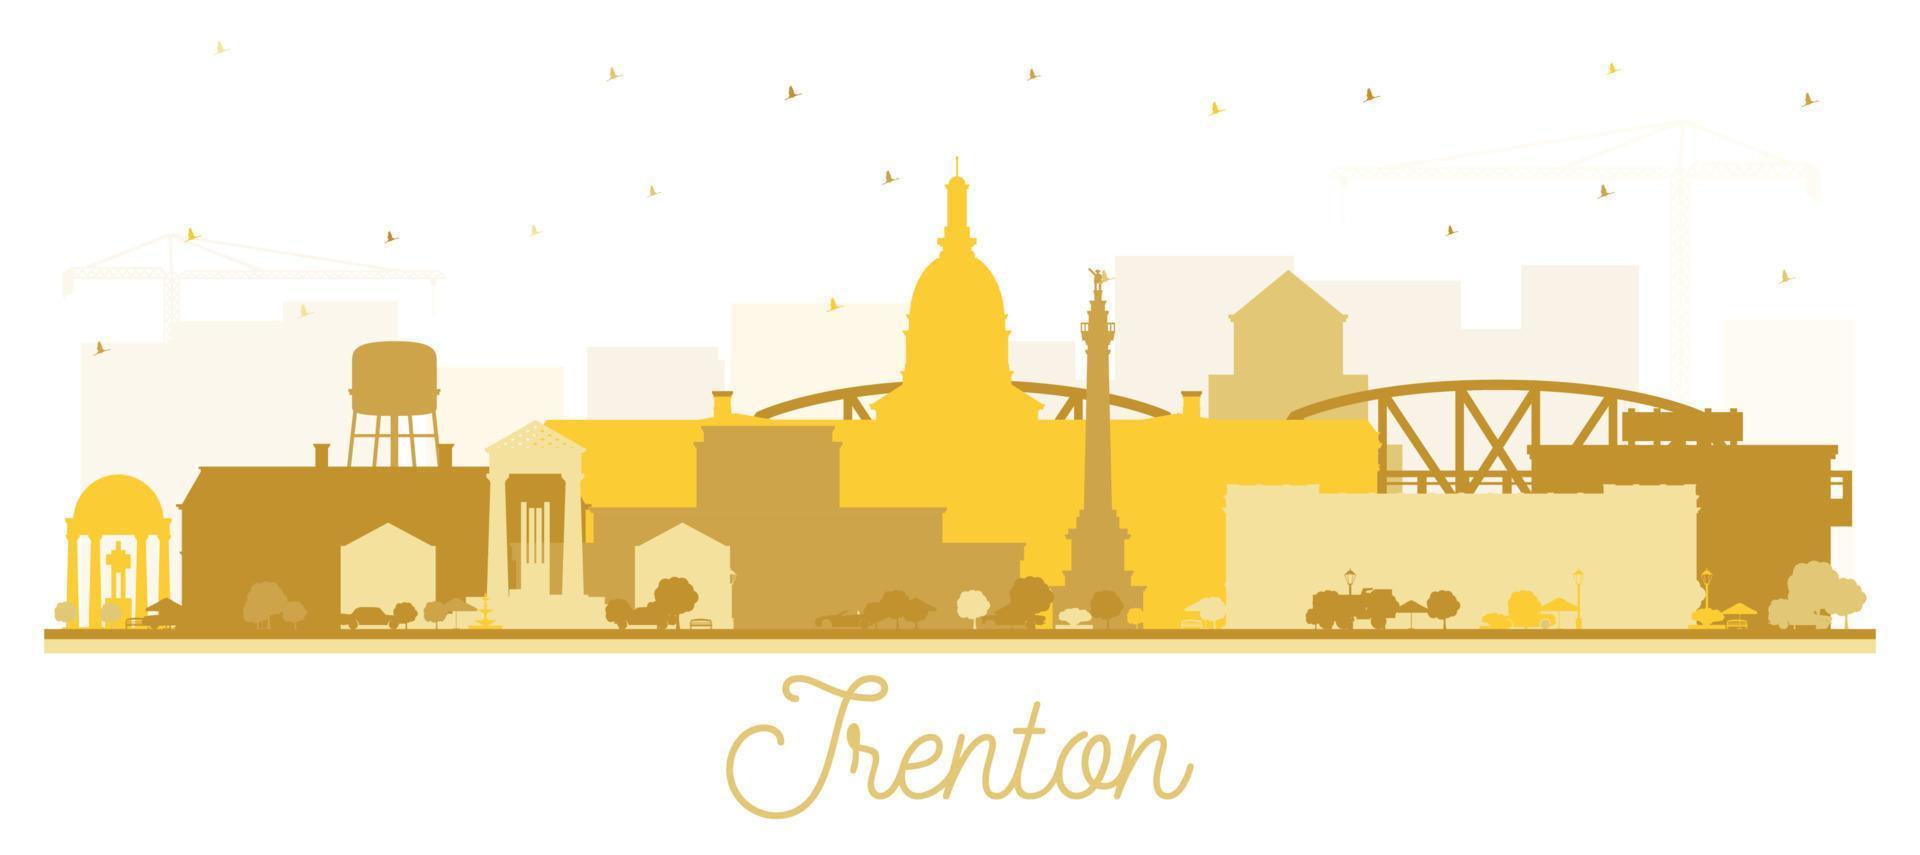 Trenton New Jersey City Skyline Silhouette with Golden Buildings Isolated on White. vector